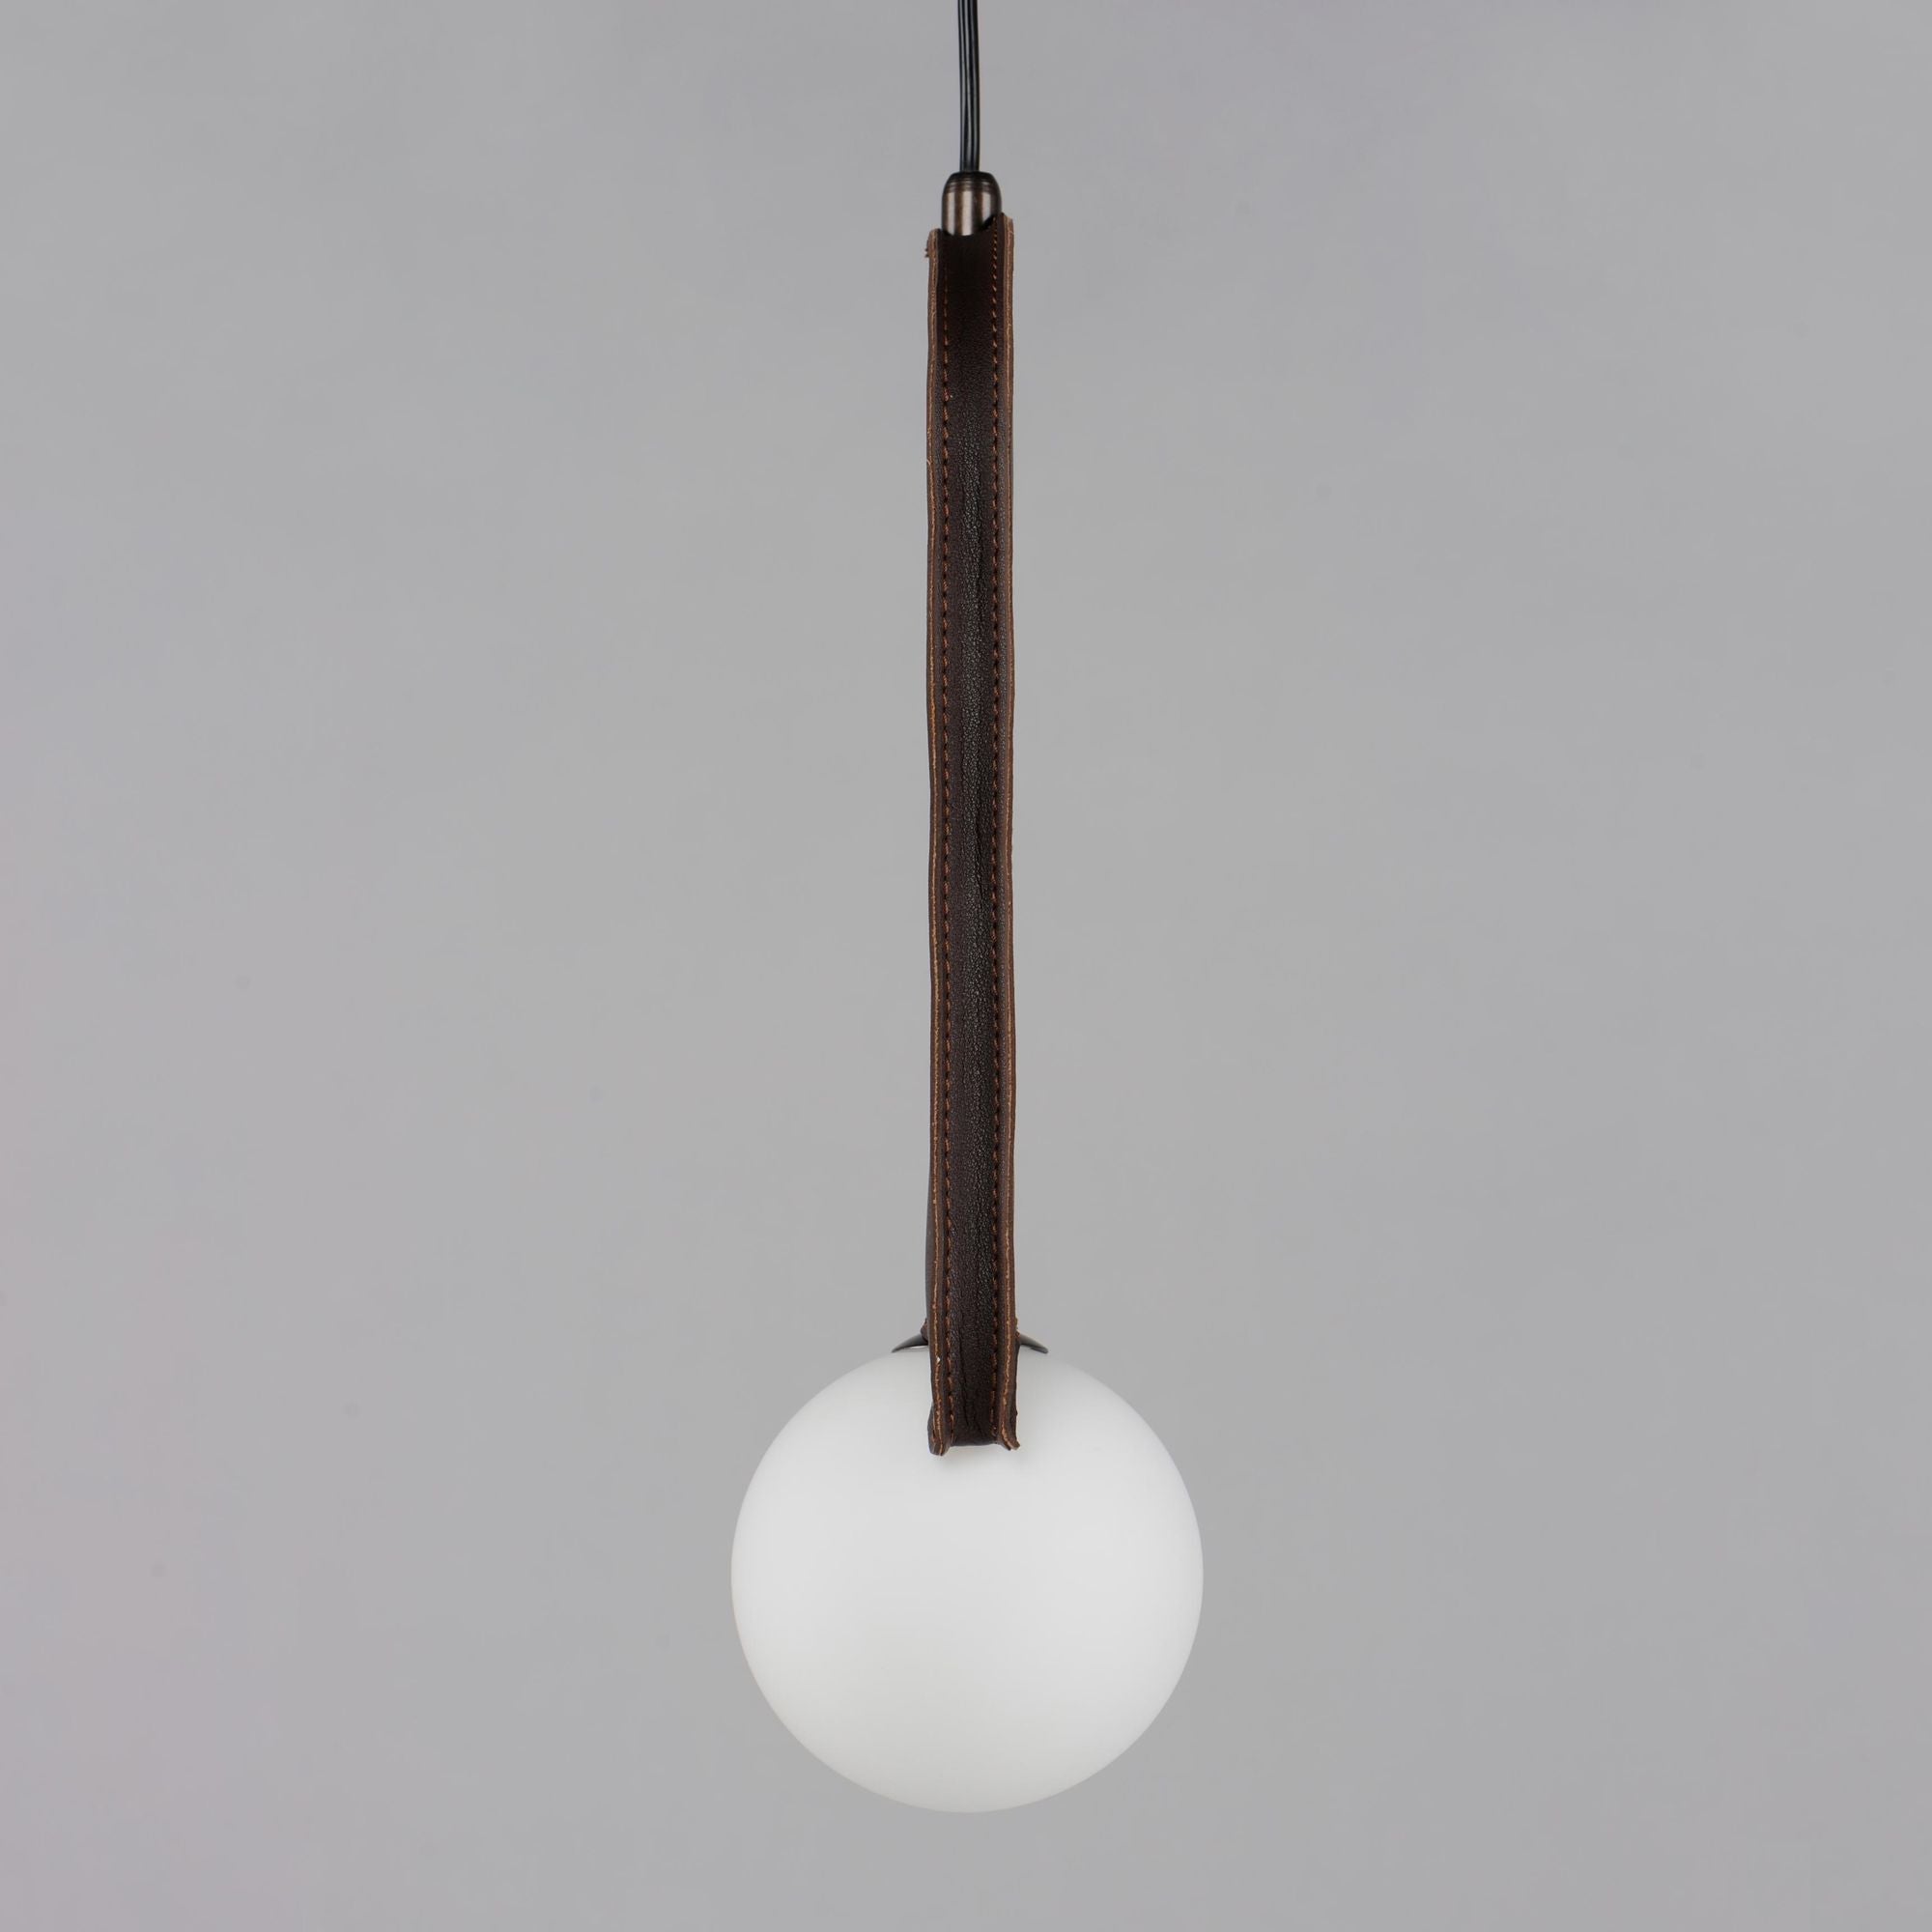 Studio M SM24603BBZ Stitched Down-Light Pendant in Brushed Bronze by Nina Magon